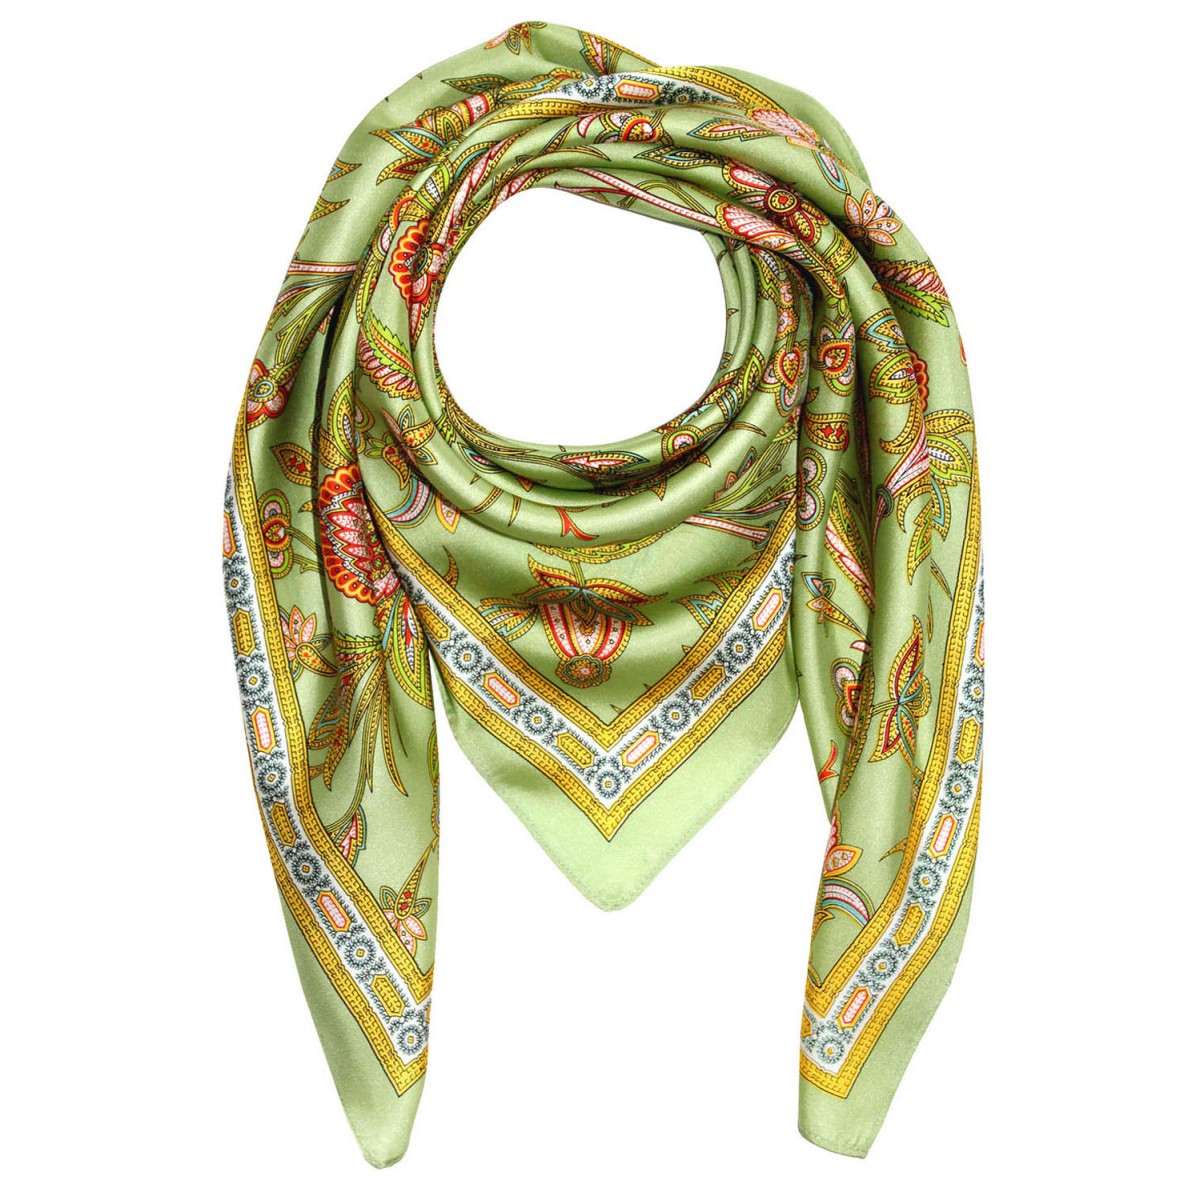 LORENZO CANA - The Official Online Store - Buy silk scarf green paisely ...